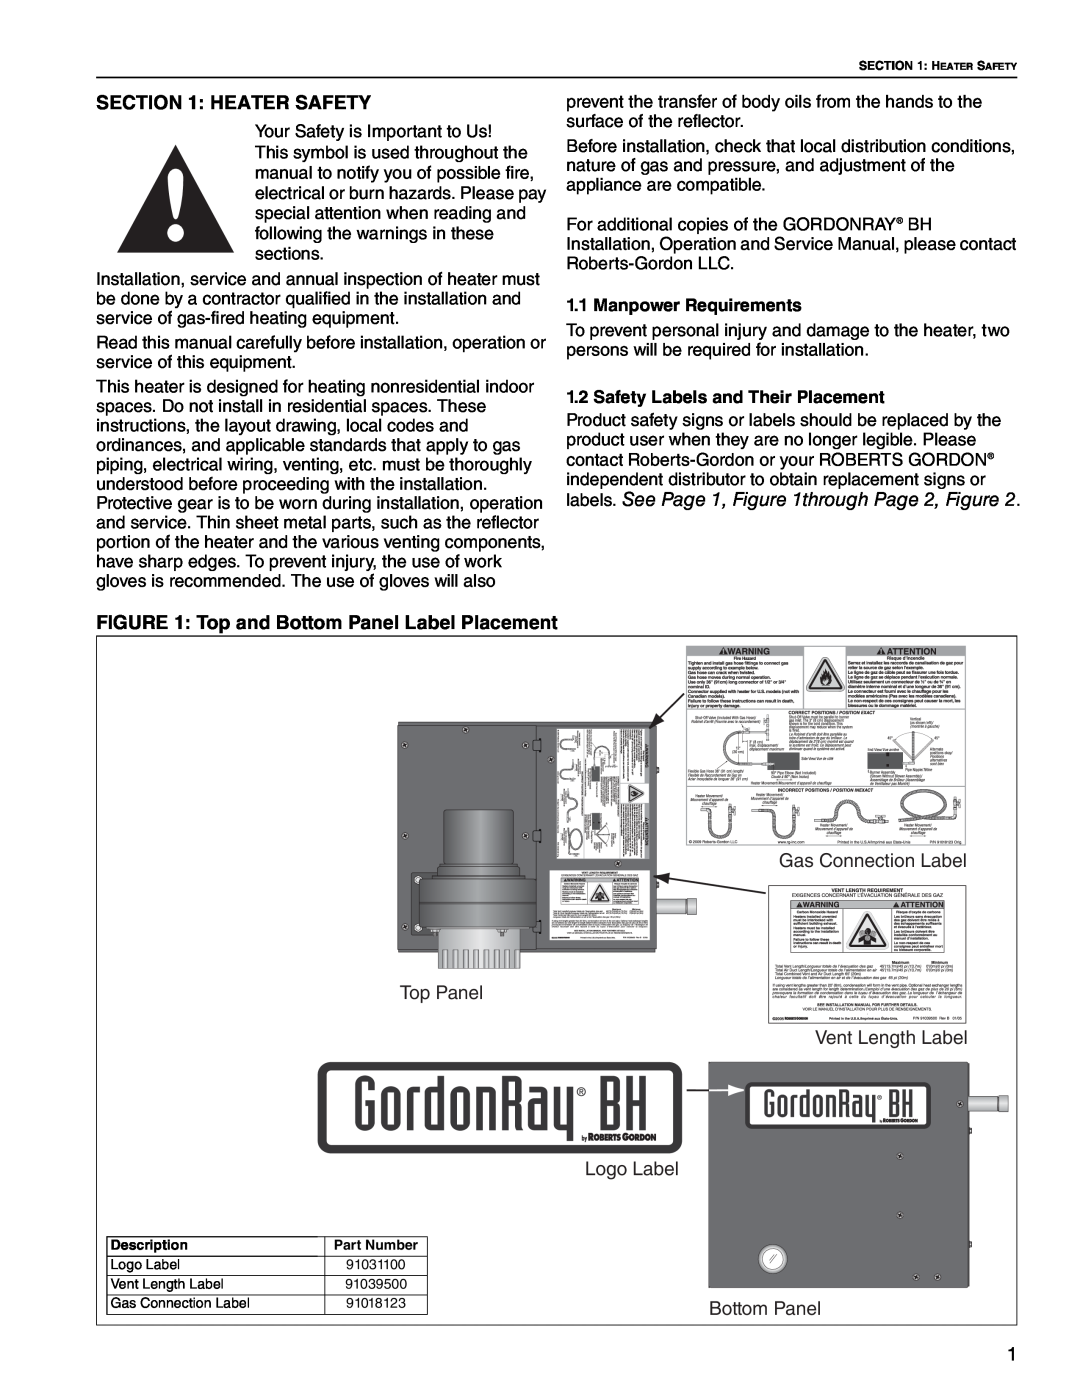 Roberts Gorden BH-200, BH-60, BH-40, BH-150 Gas Connection Label, Top Panel, Vent Length Label, Logo Label, Bottom Panel 